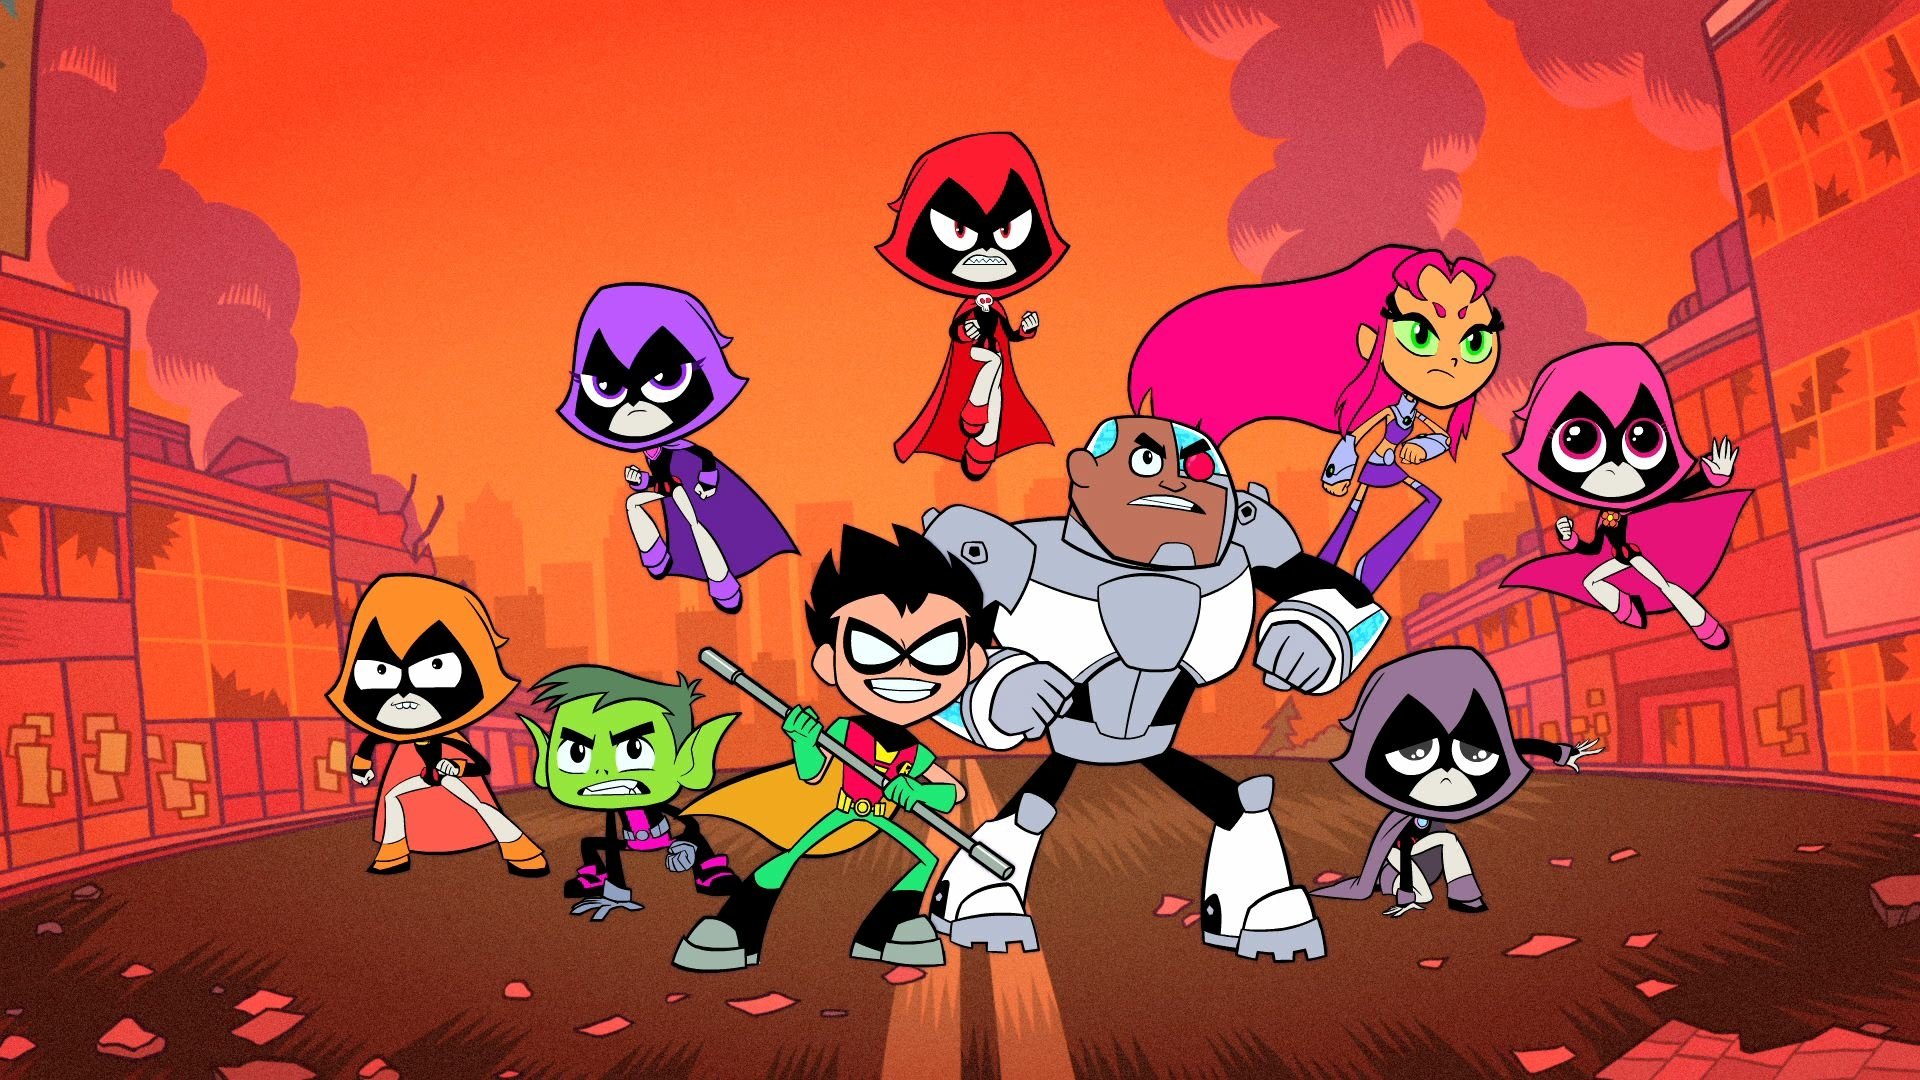 HD wallpaper of Teen Titans Go! characters Robin, Cyborg, Starfire, Raven, and Beast Boy in front of an orange cityscape.